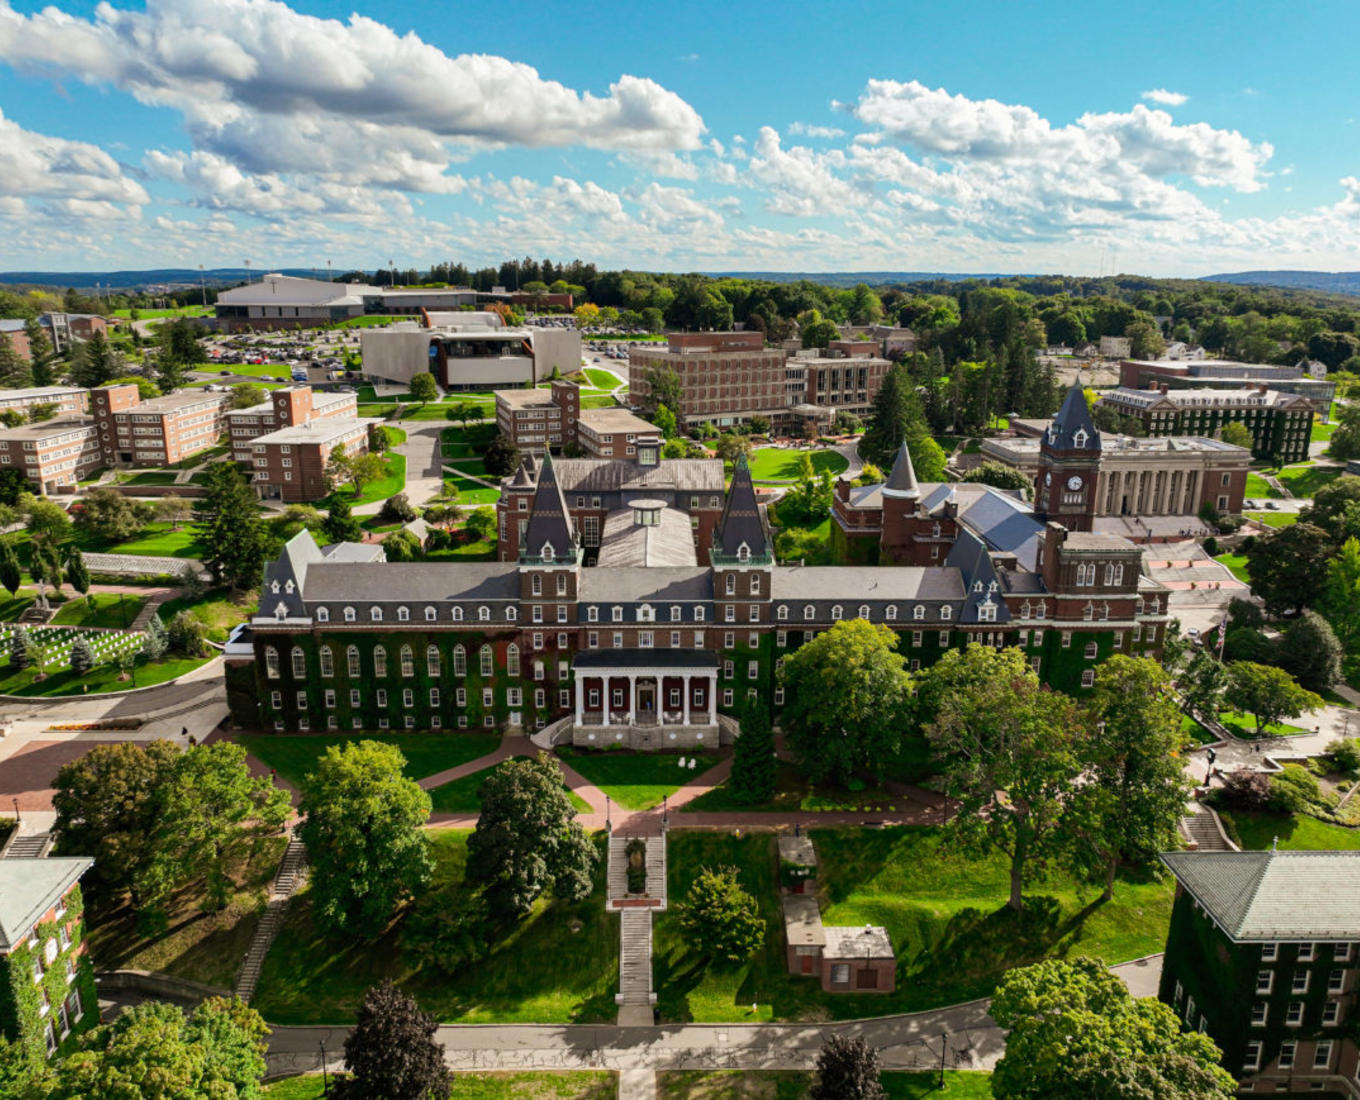 Photo taken from the sky above a college campus showing lots of green space and old brick buildings.